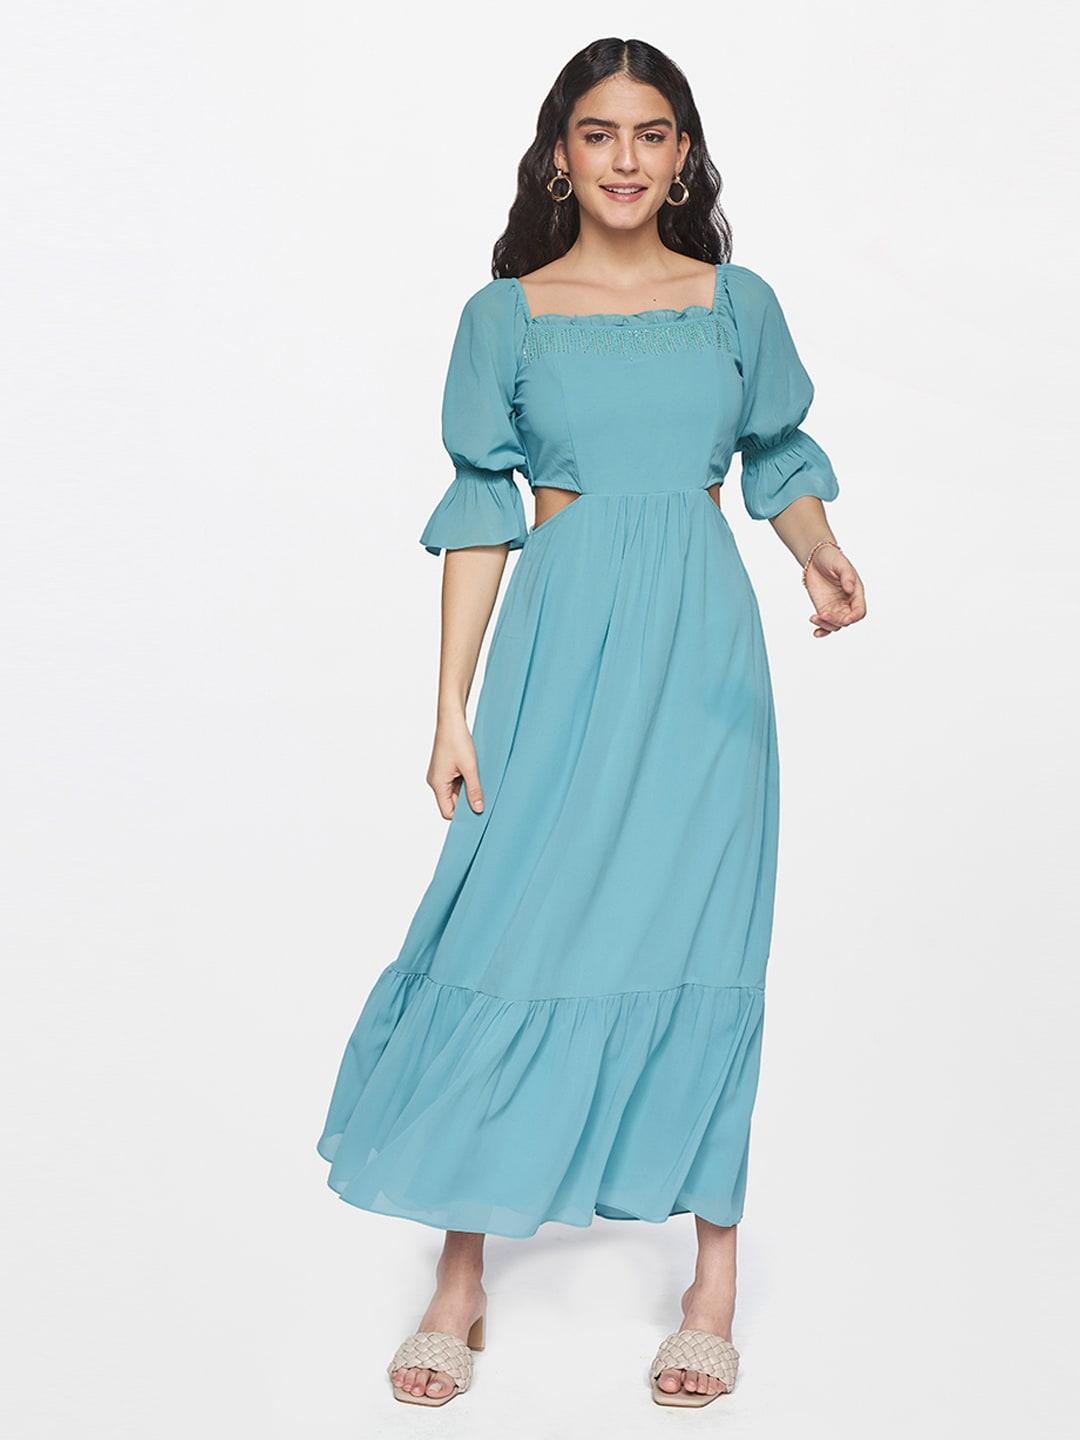 AND Teal Solid A-Line Maxi Dress